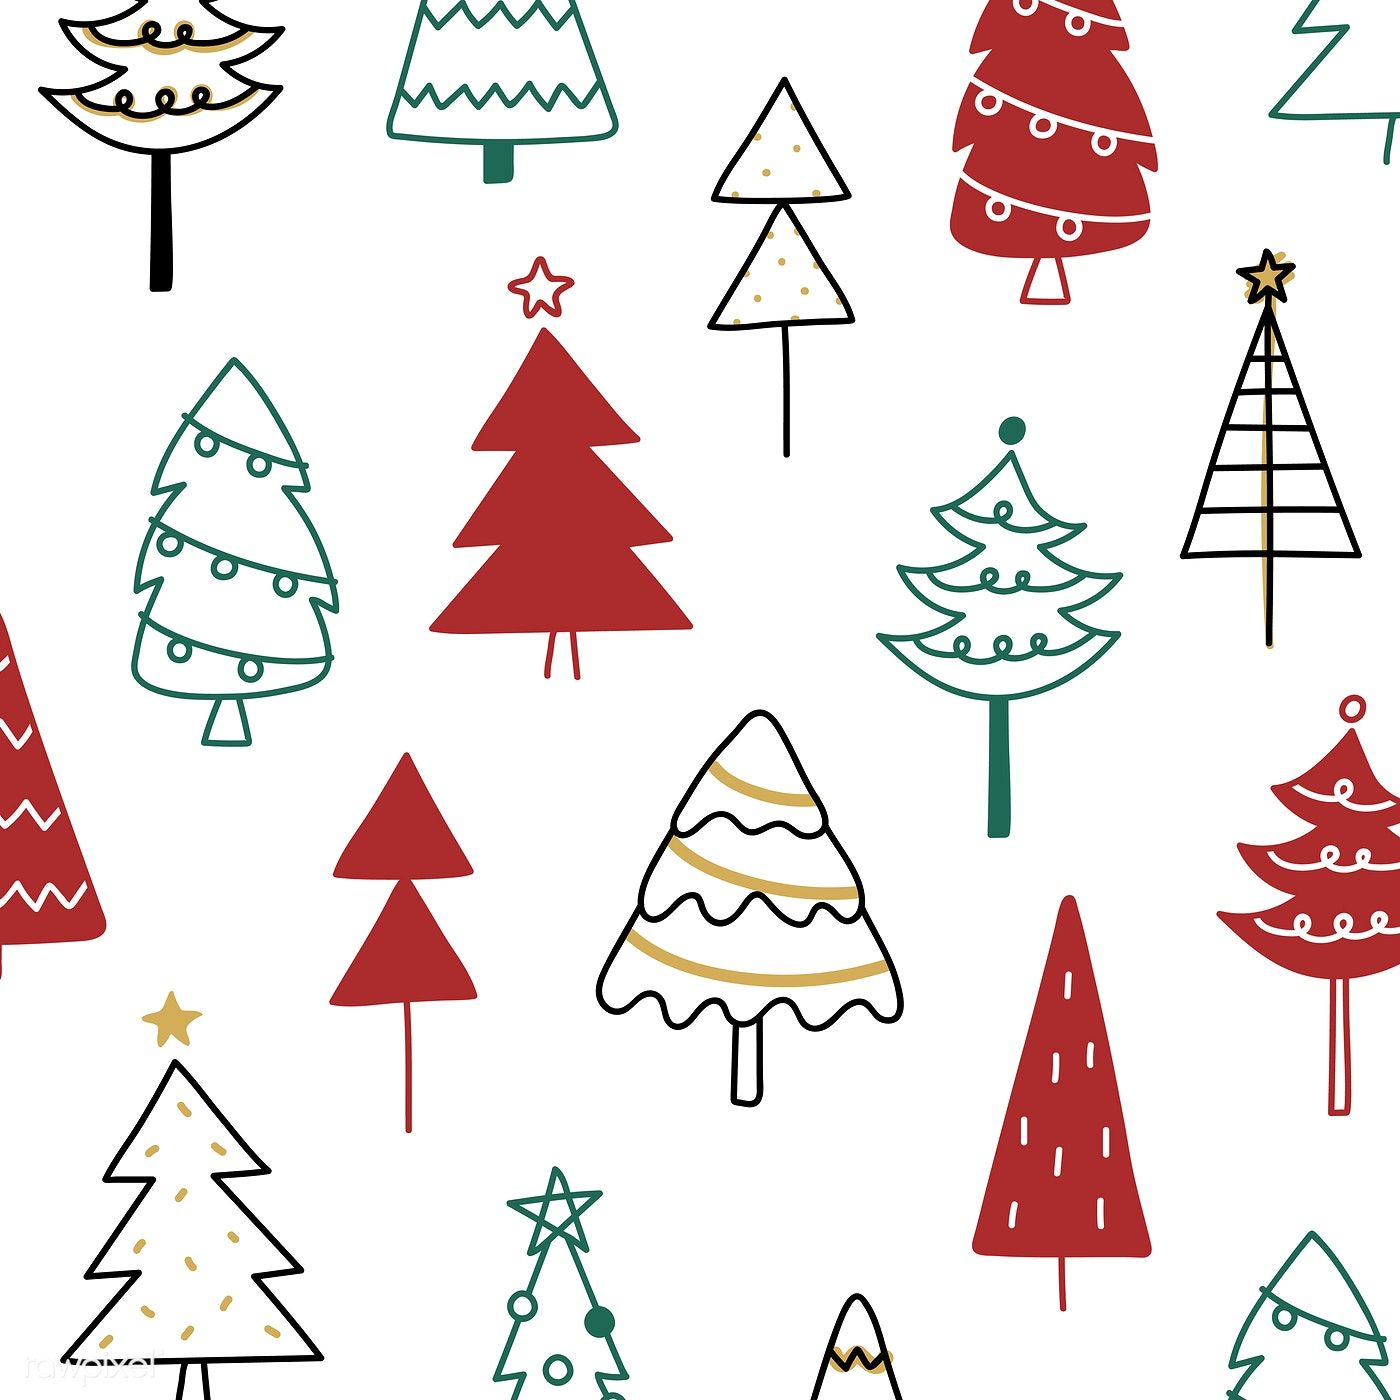 Download premium vector of Christmas pine tree pattern background